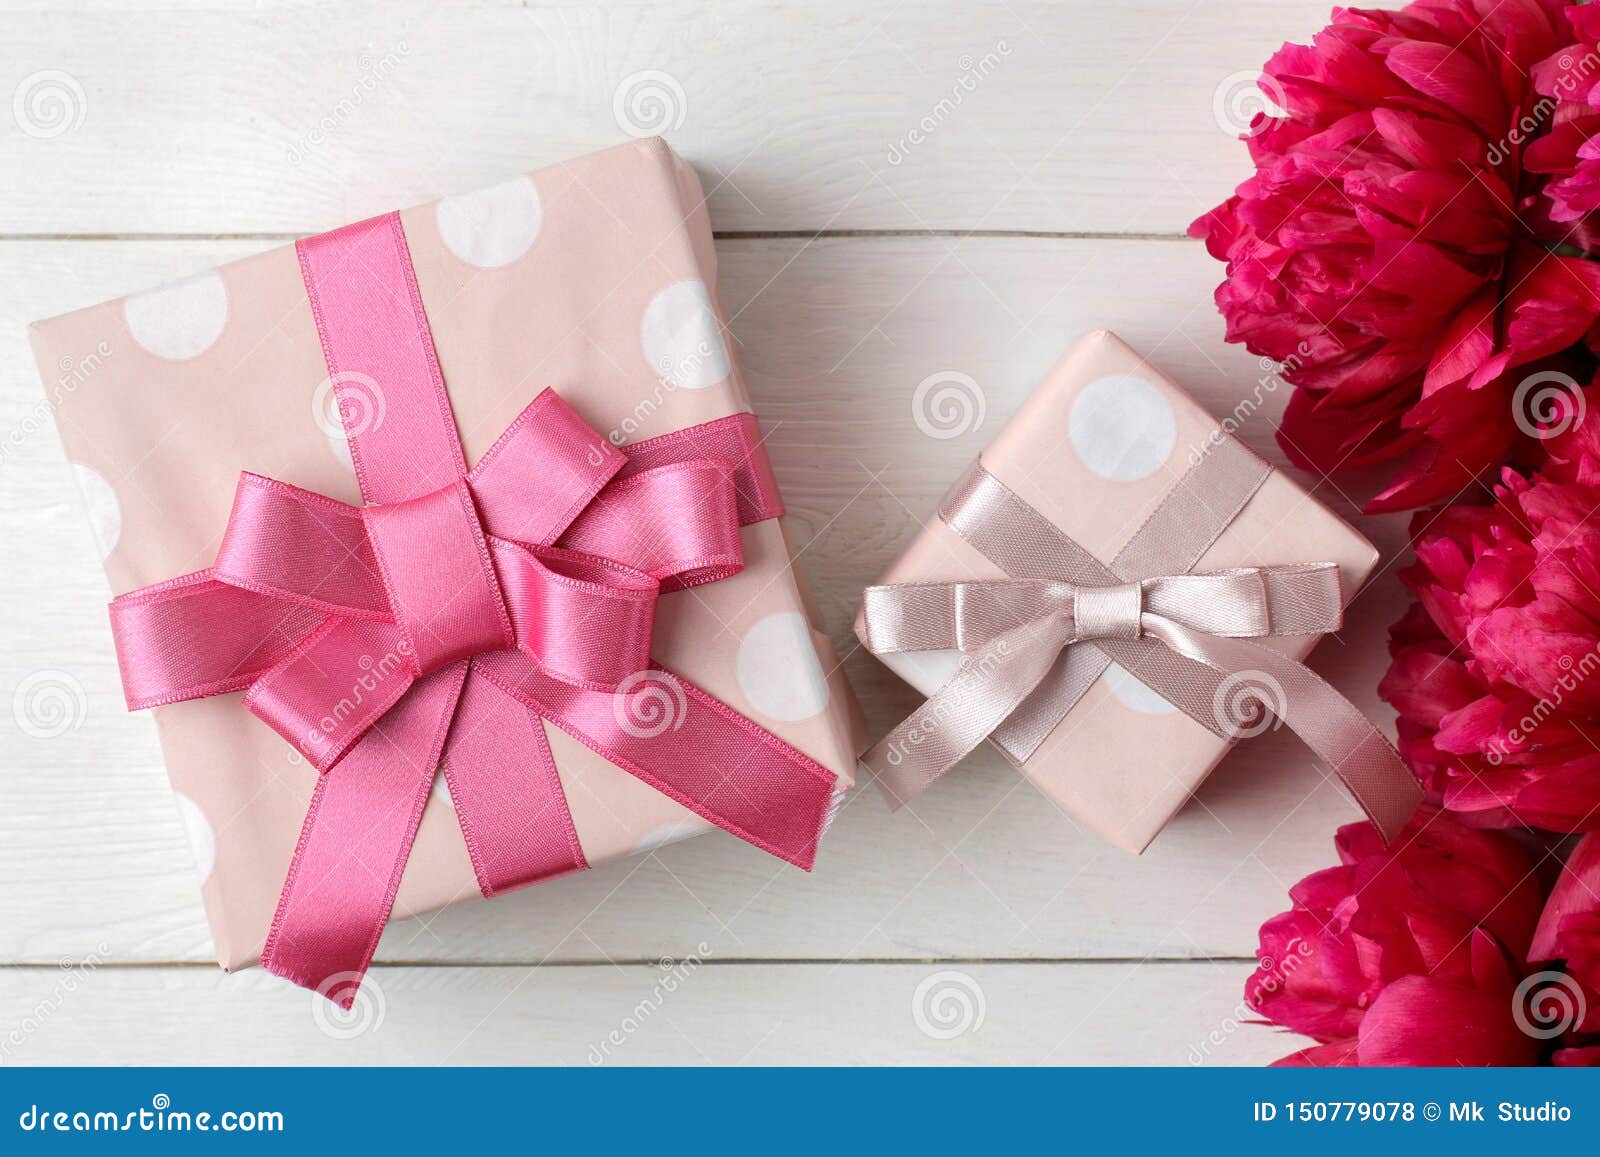 Beautiful Bright Pink Flowers Peonies And Gift Box On A